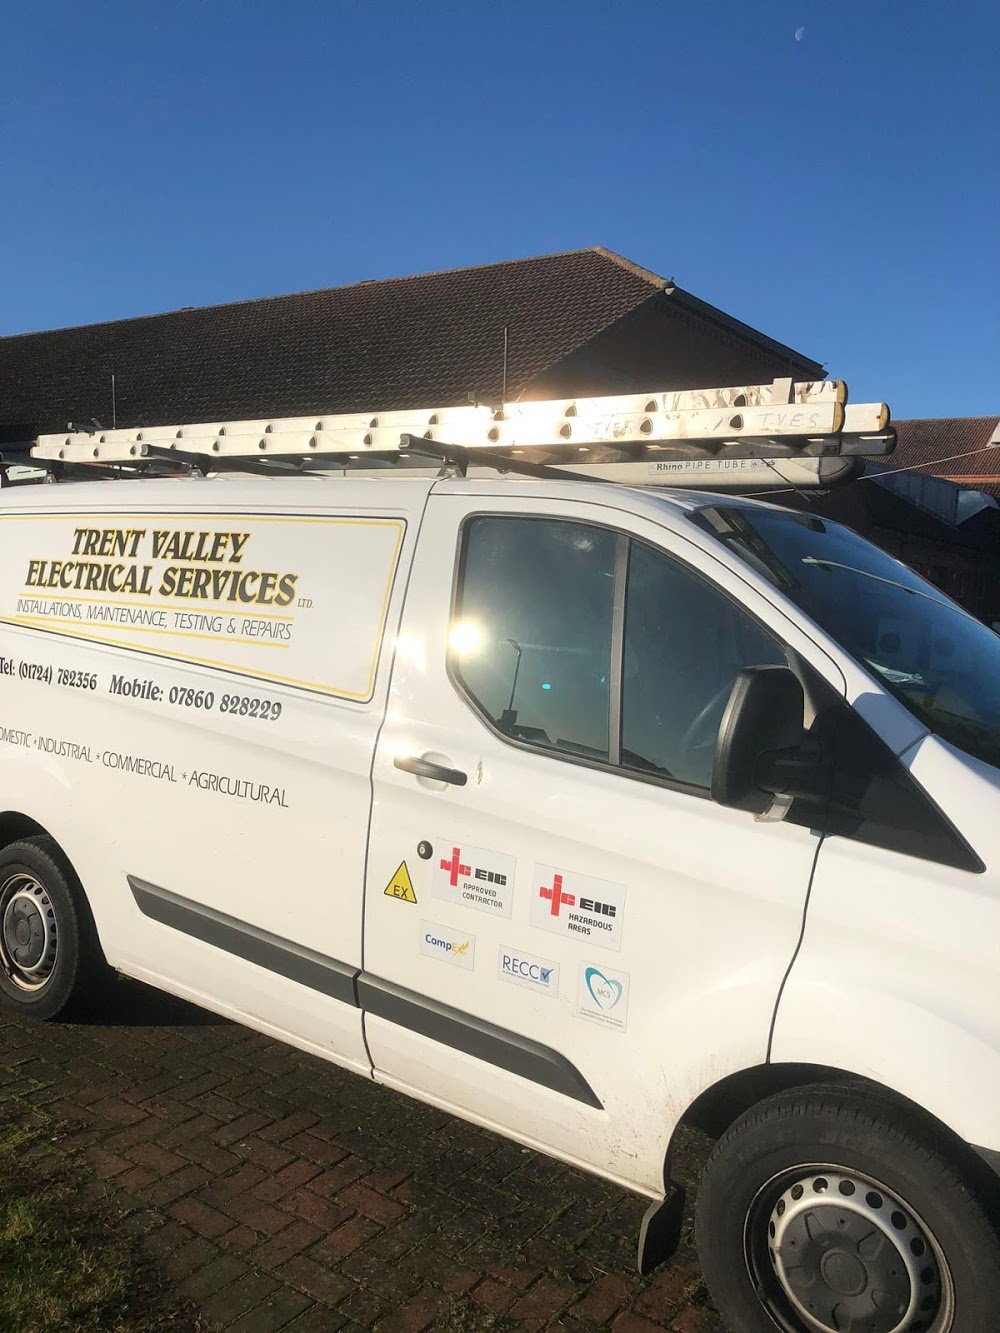 Trent Valley Electrical Services Ltd